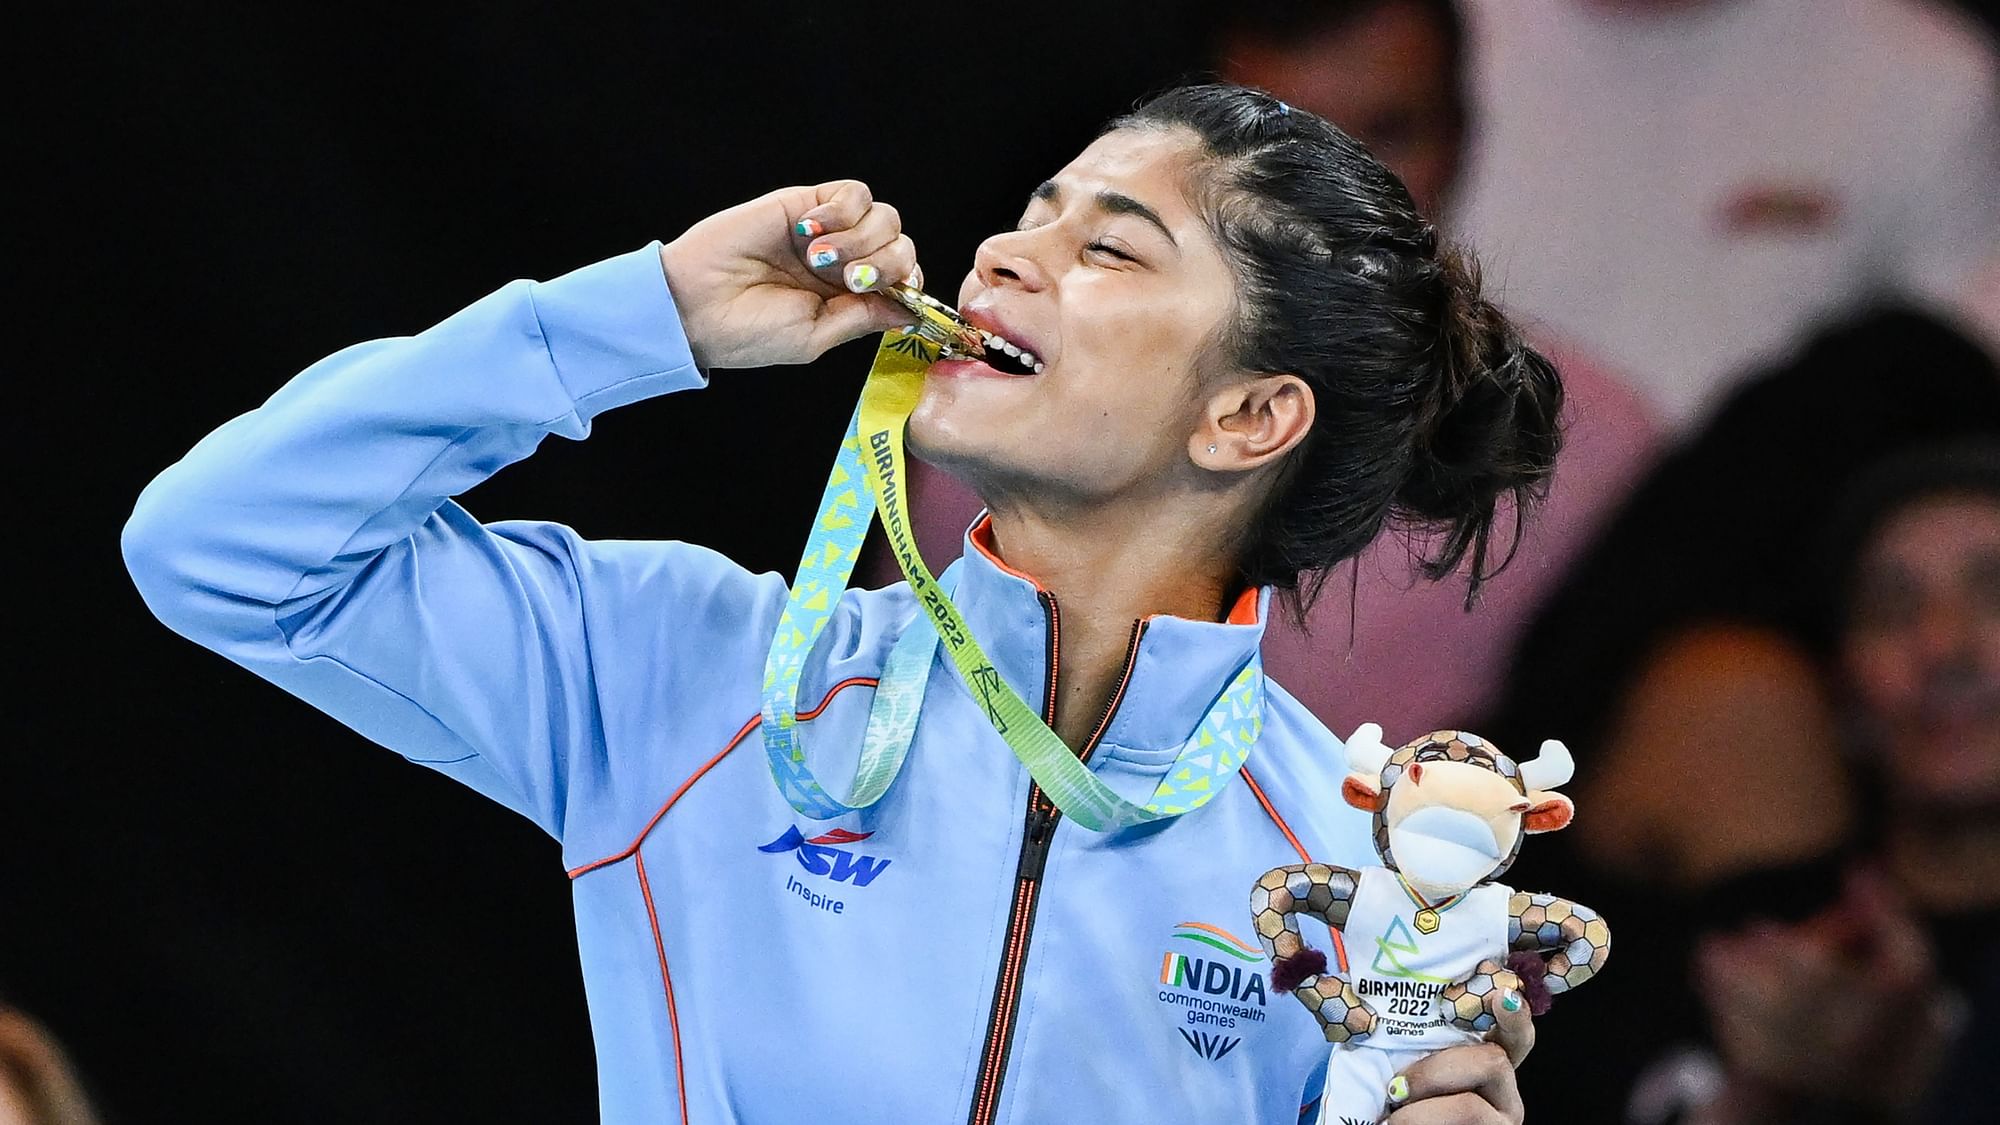 <div class="paragraphs"><p>Birmingham: Boxer Nikhat Zareen with the gold medal after winning the final of 48kg-50kg (Light Flyweight) boxing match at the 2022 CWG.</p></div>